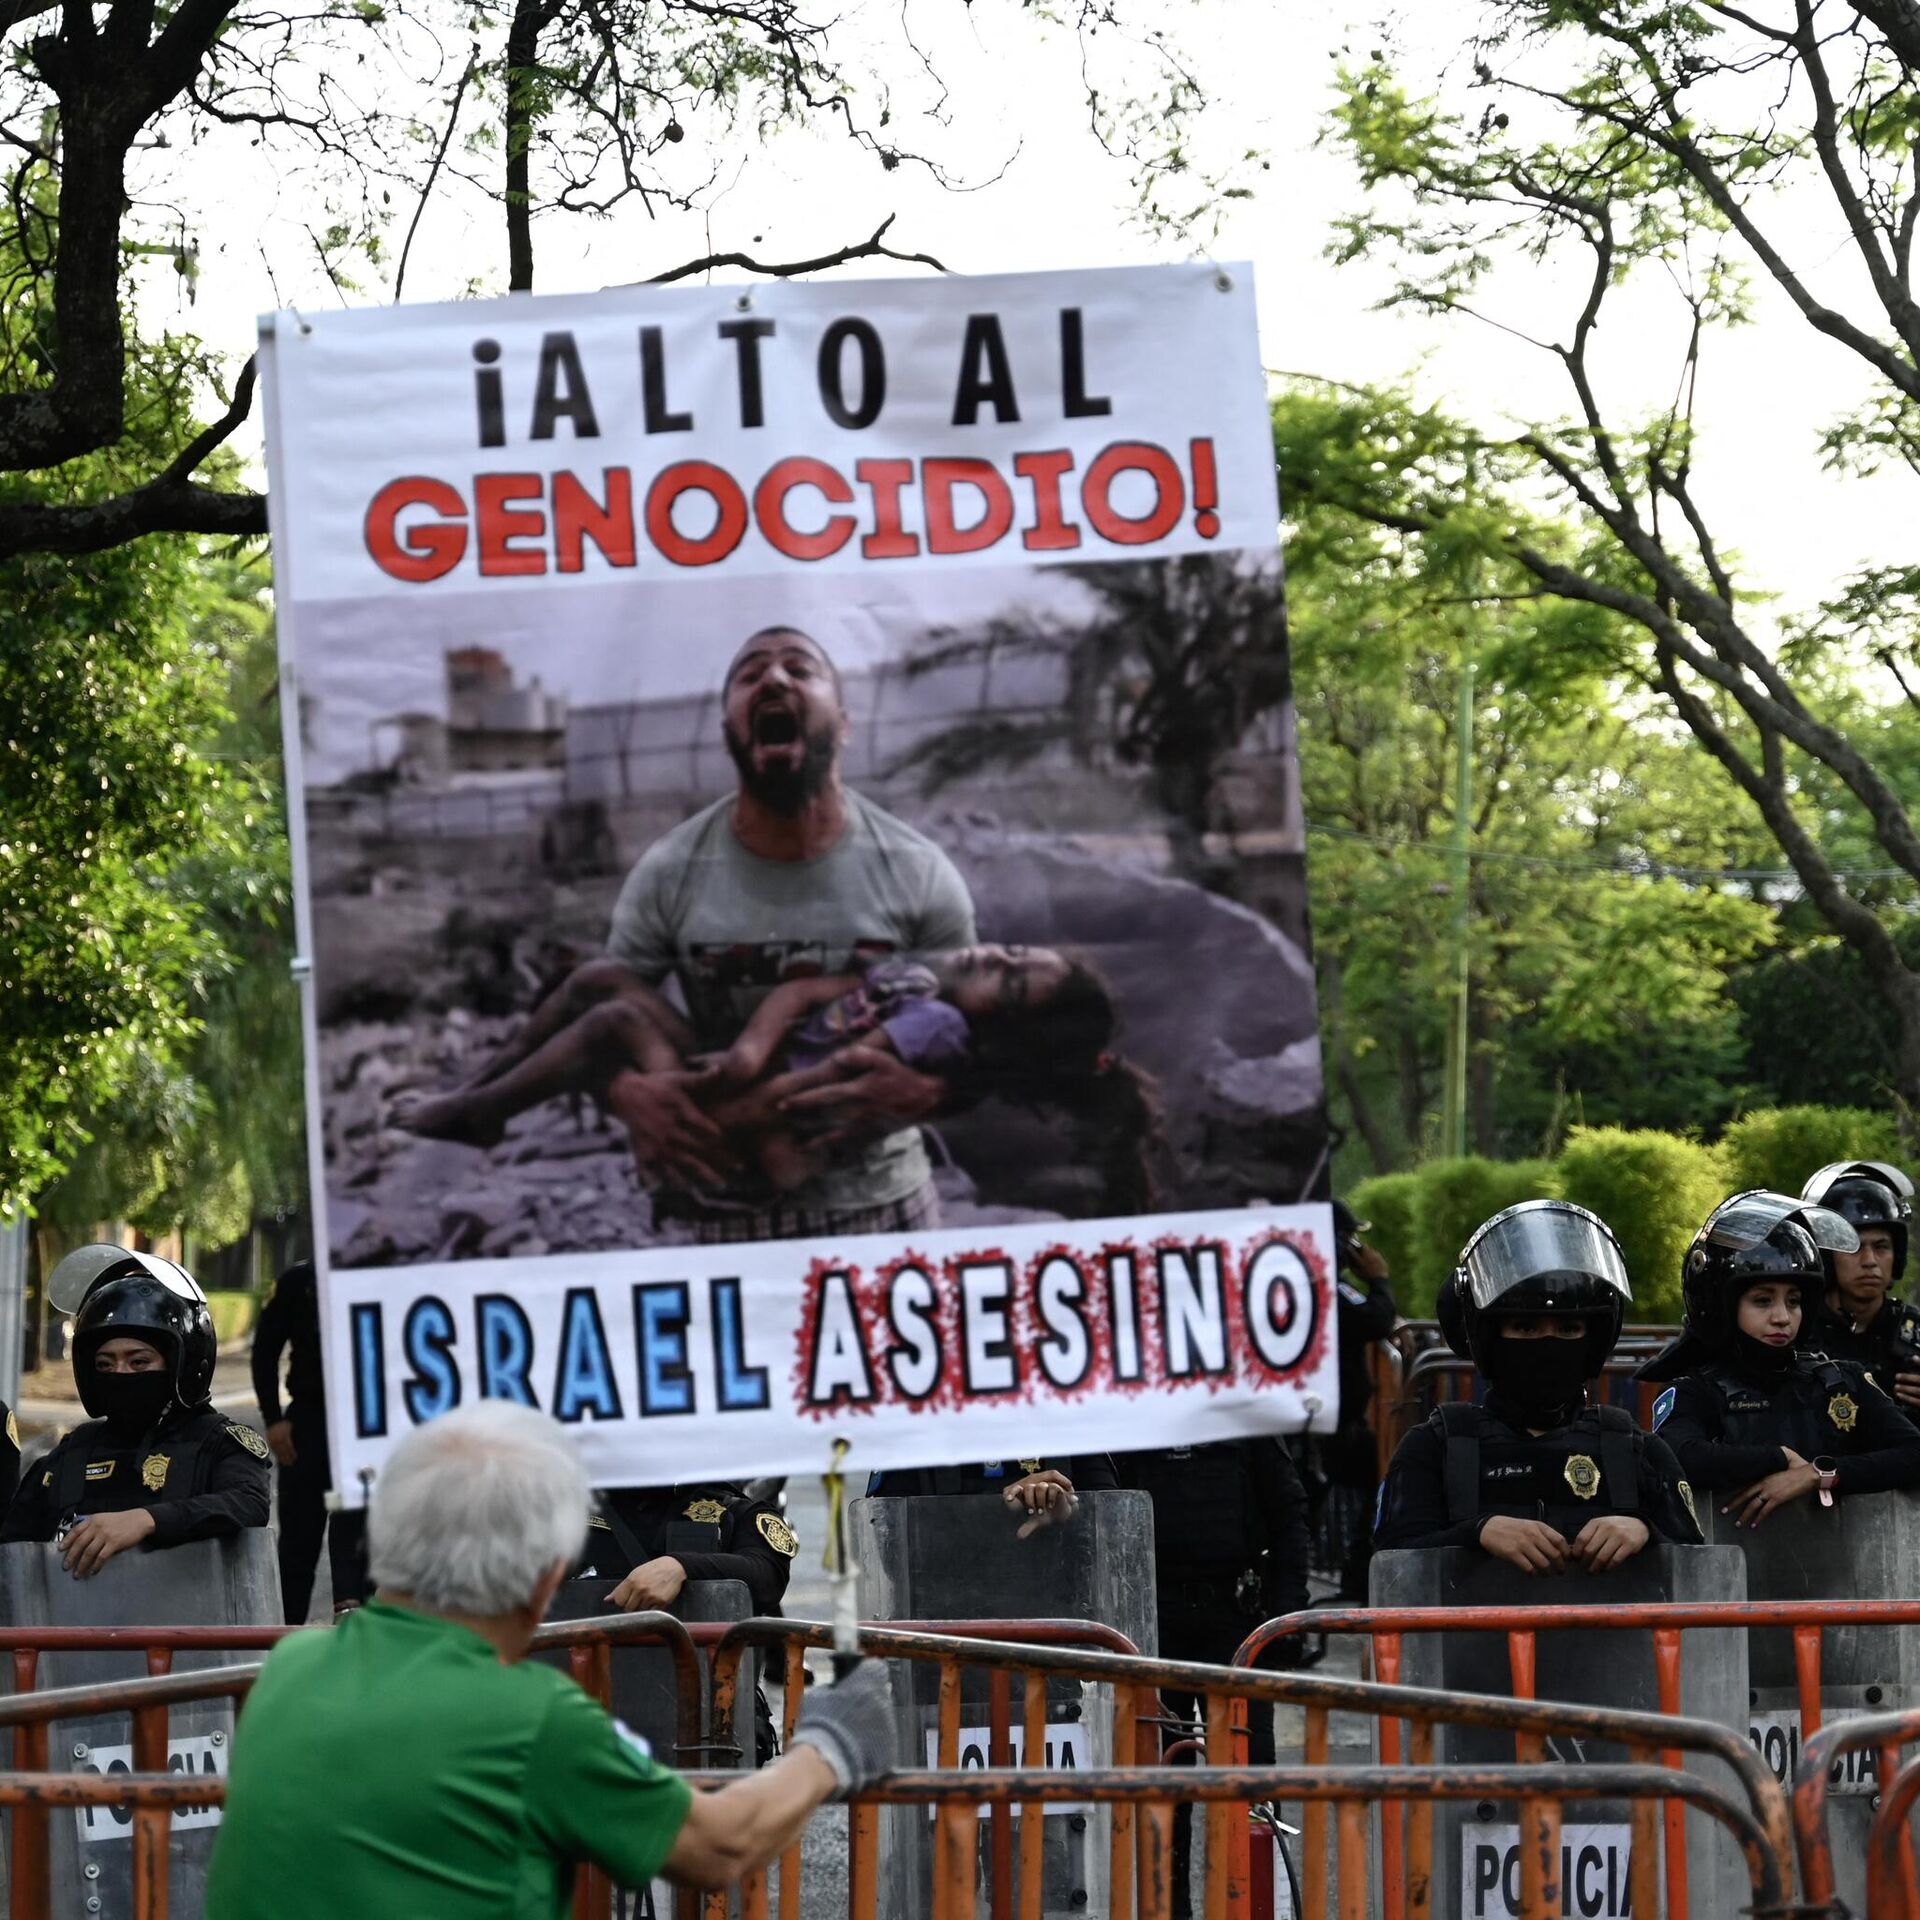 Protesters Attack Israel's Embassy in Mexico City With Molotov Cocktails -  Reports